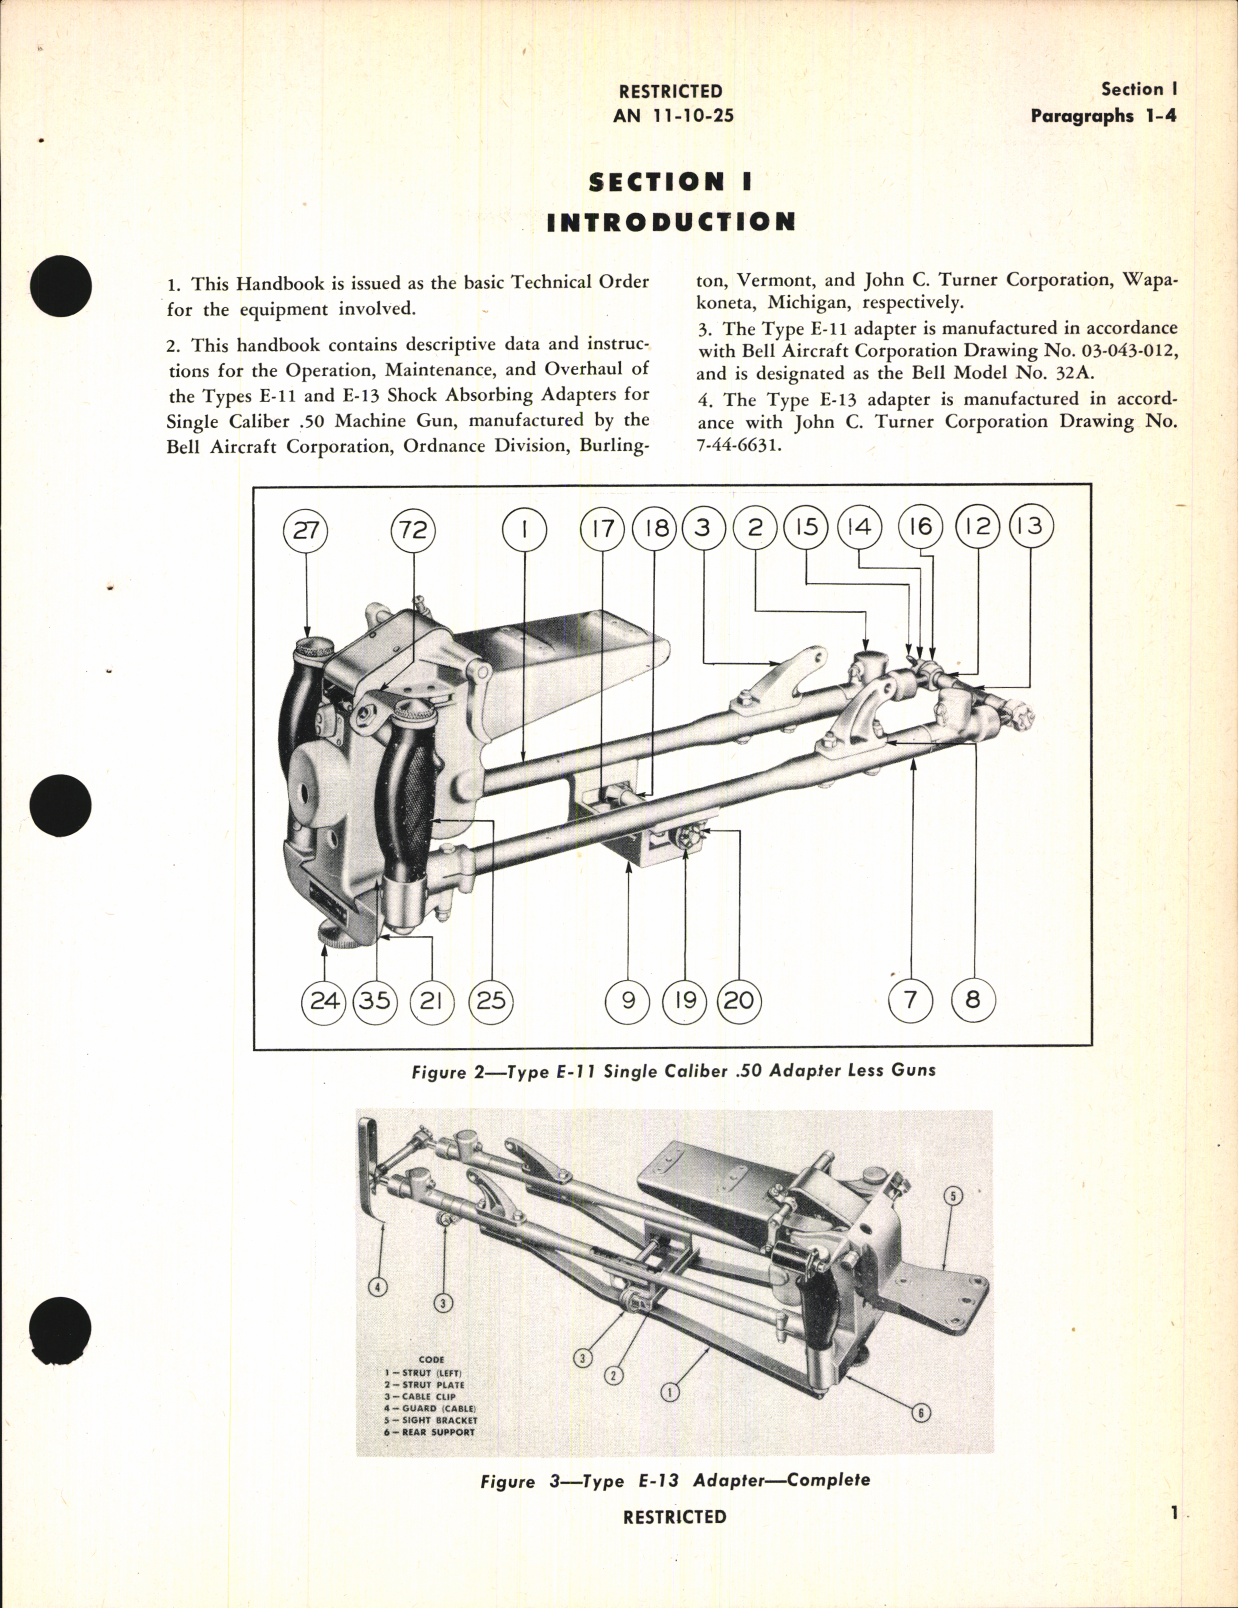 Sample page 5 from AirCorps Library document: Handbook of Instructions with Parts Catalog for Single Adapters for Caliber .50 Machine Guns